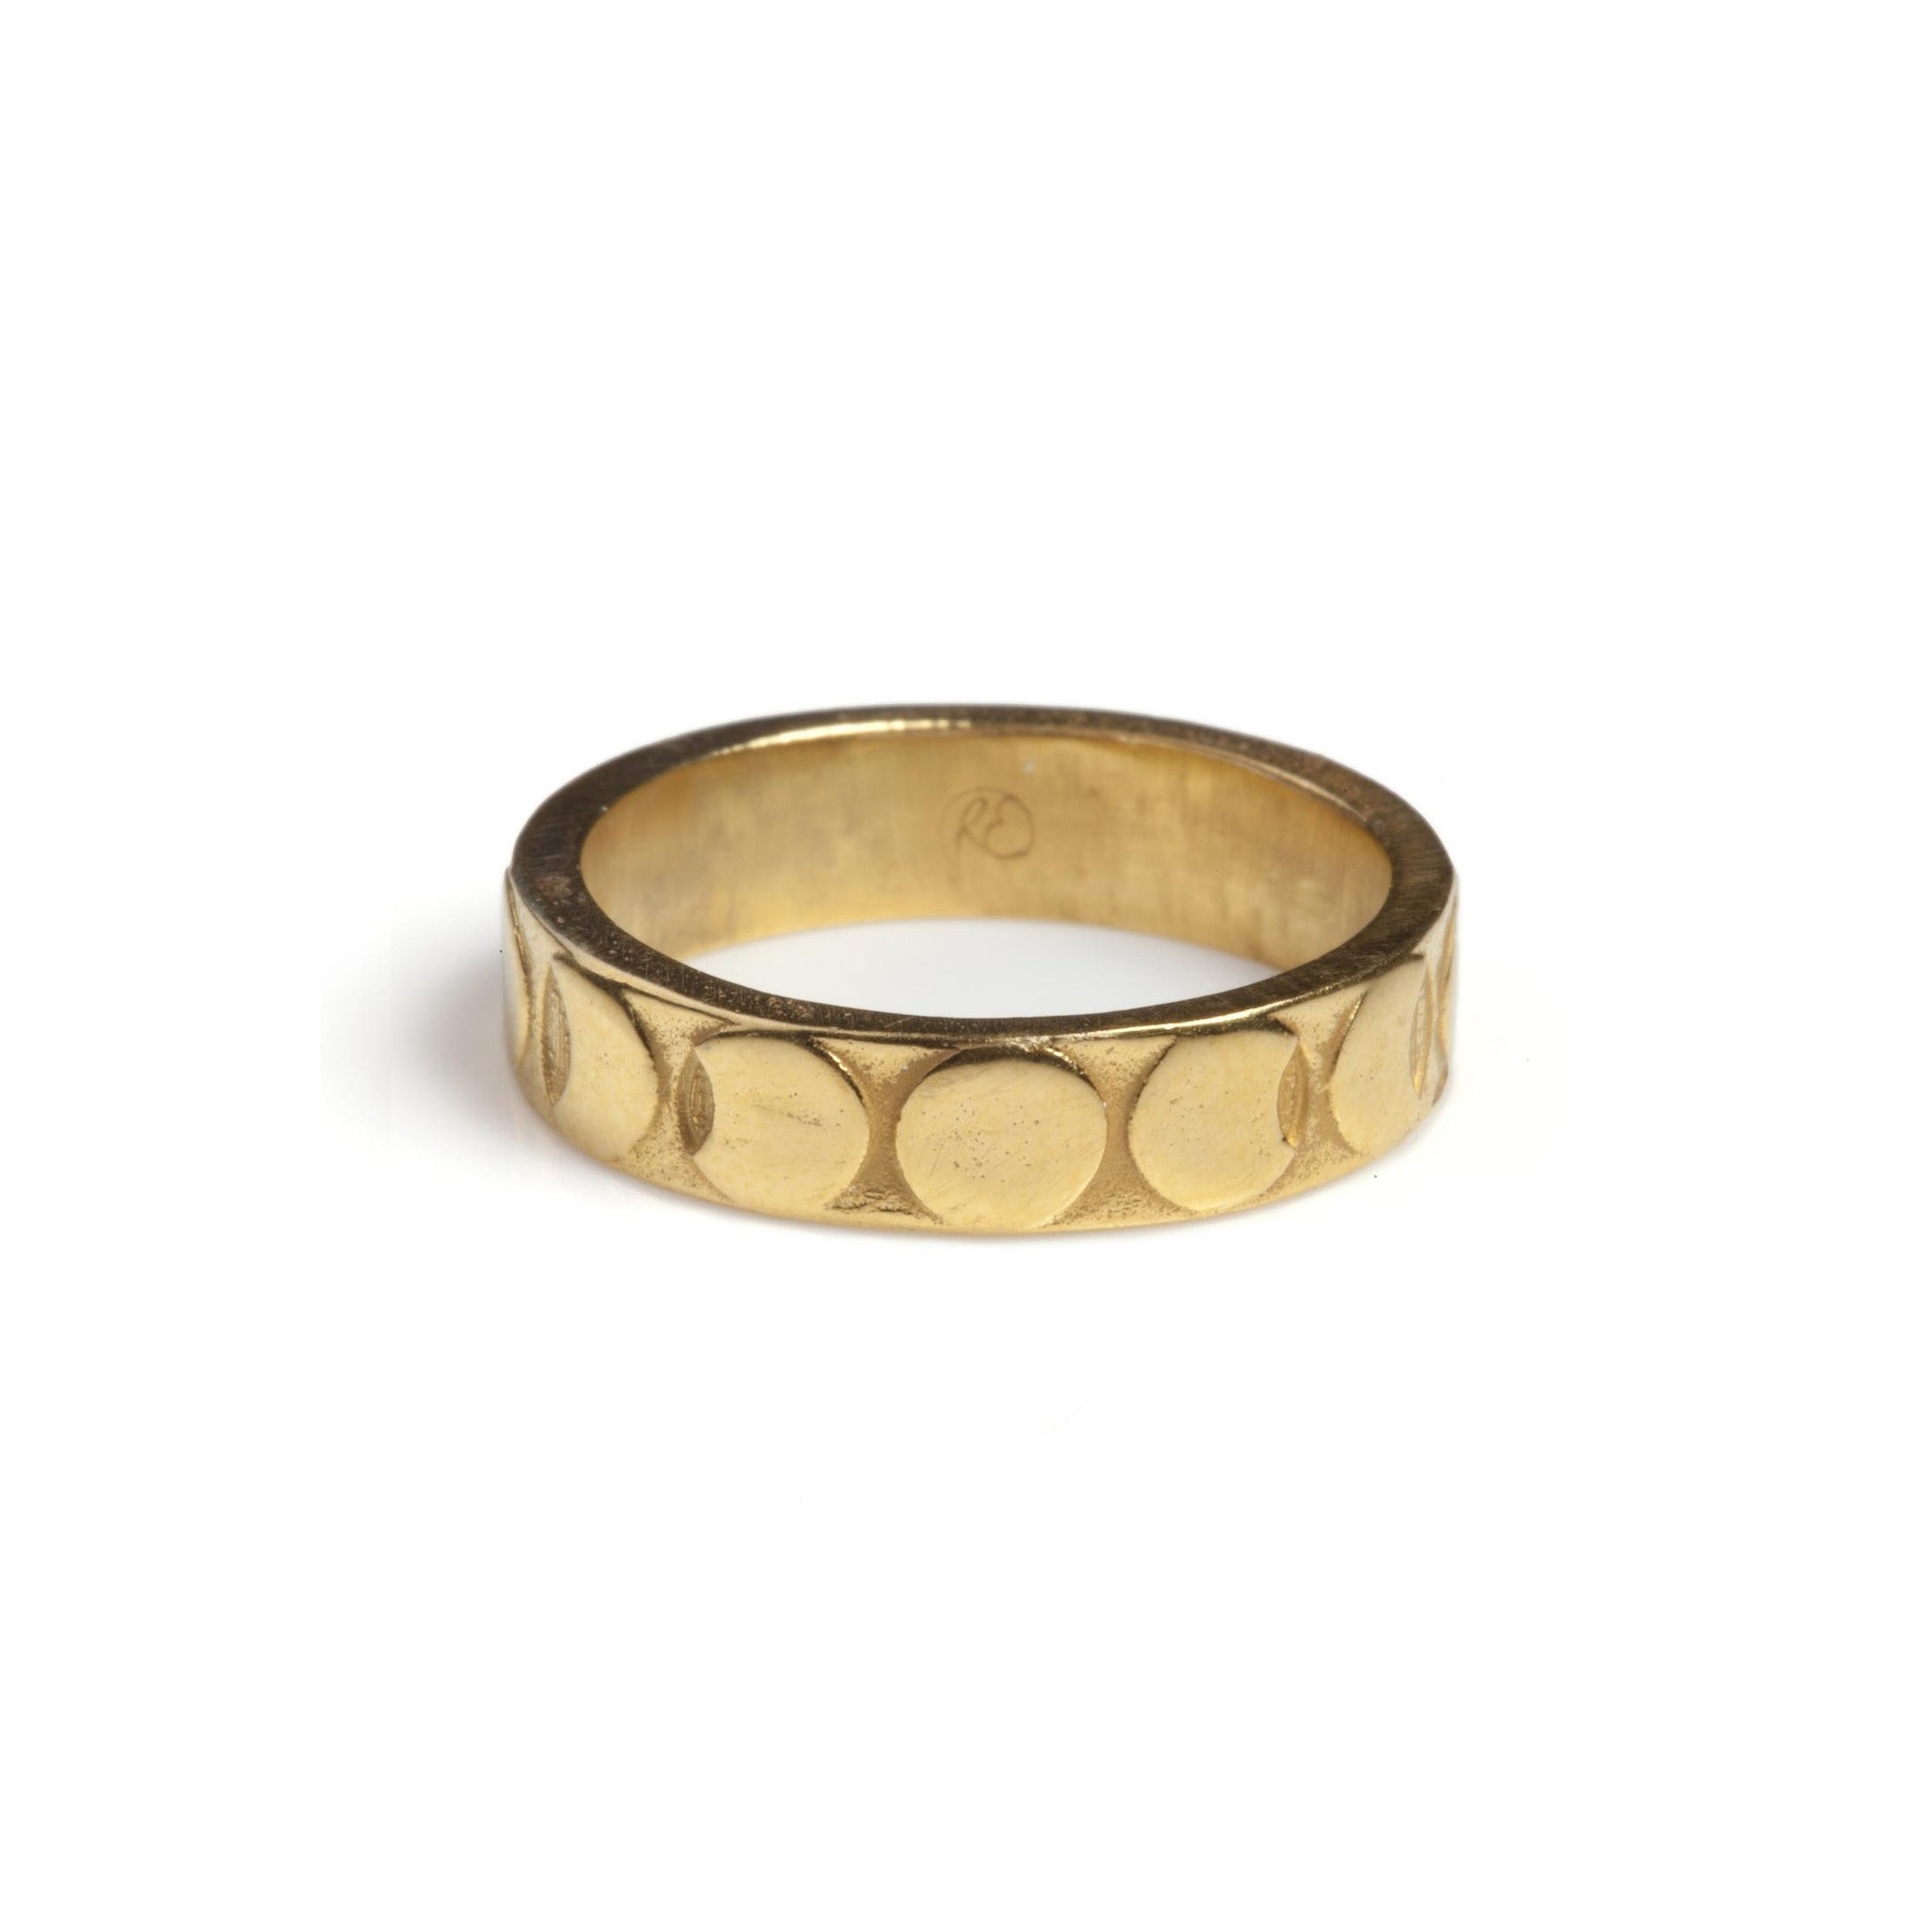 Moon Phases Band Ring - J / Gold Vermeil